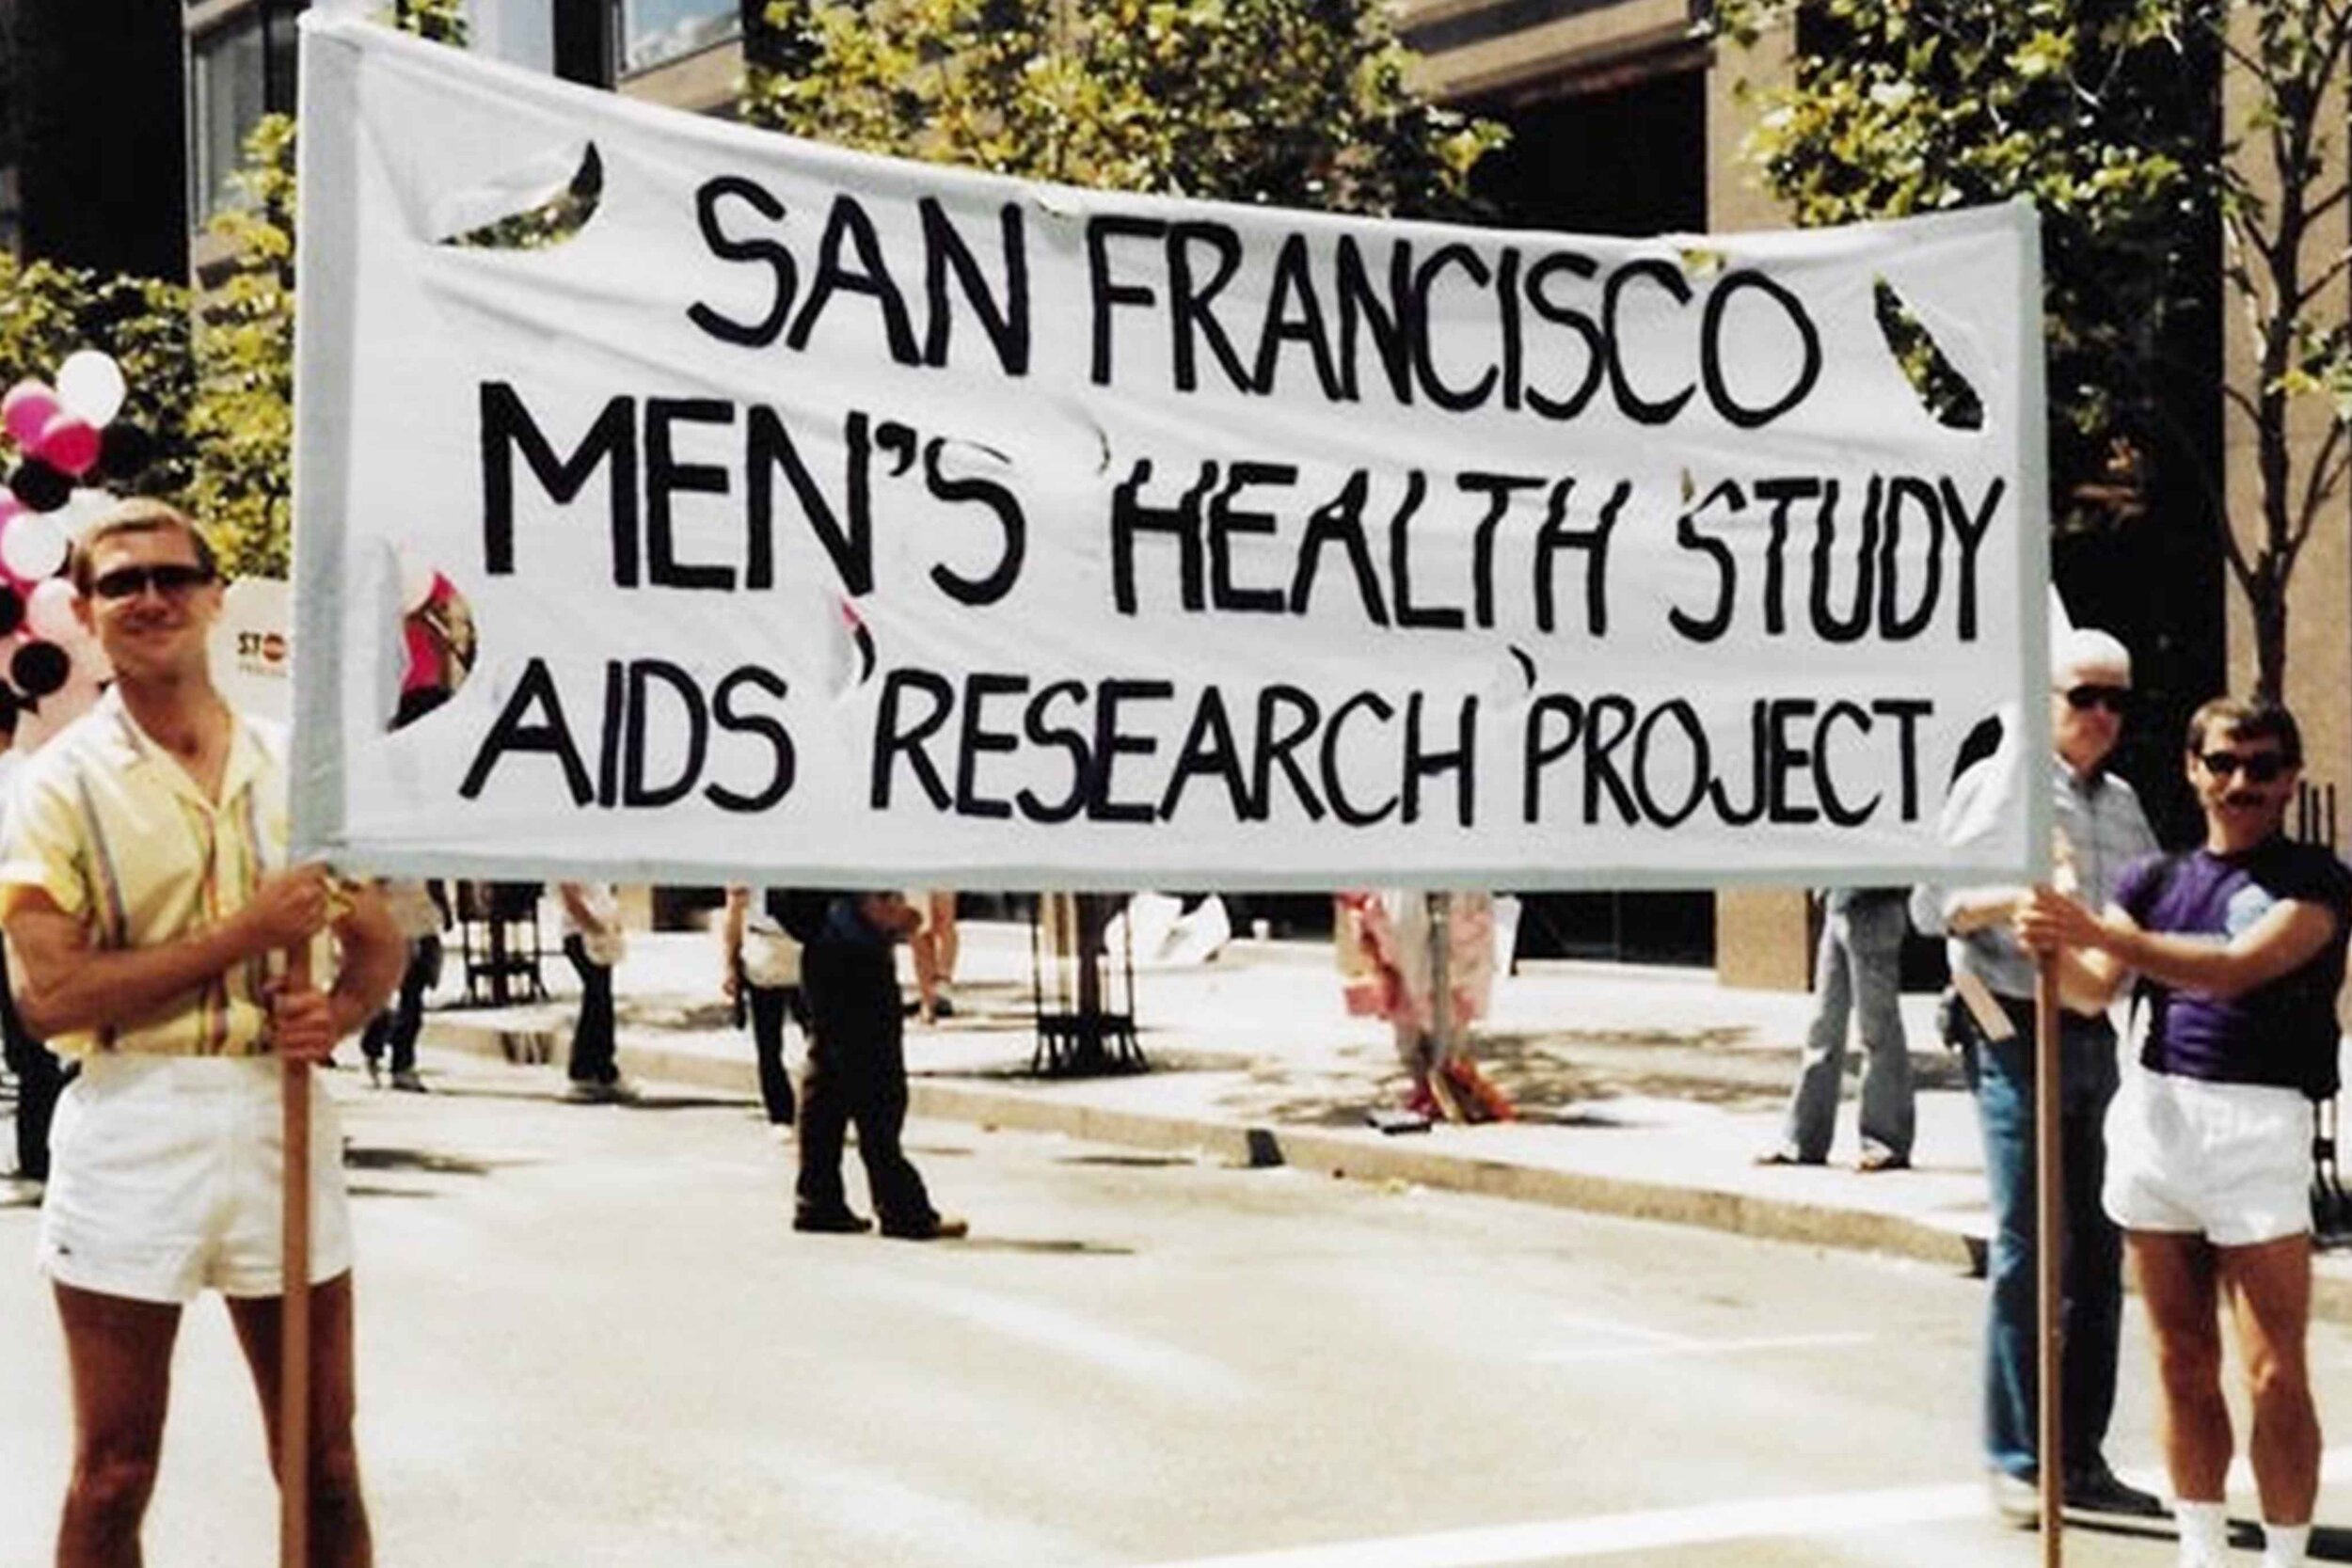  Jaime Geaga worked with the San Francisco Men’s Health Study as a physician assistant in the 1980s. Courtesy of Jaime Geaga. 